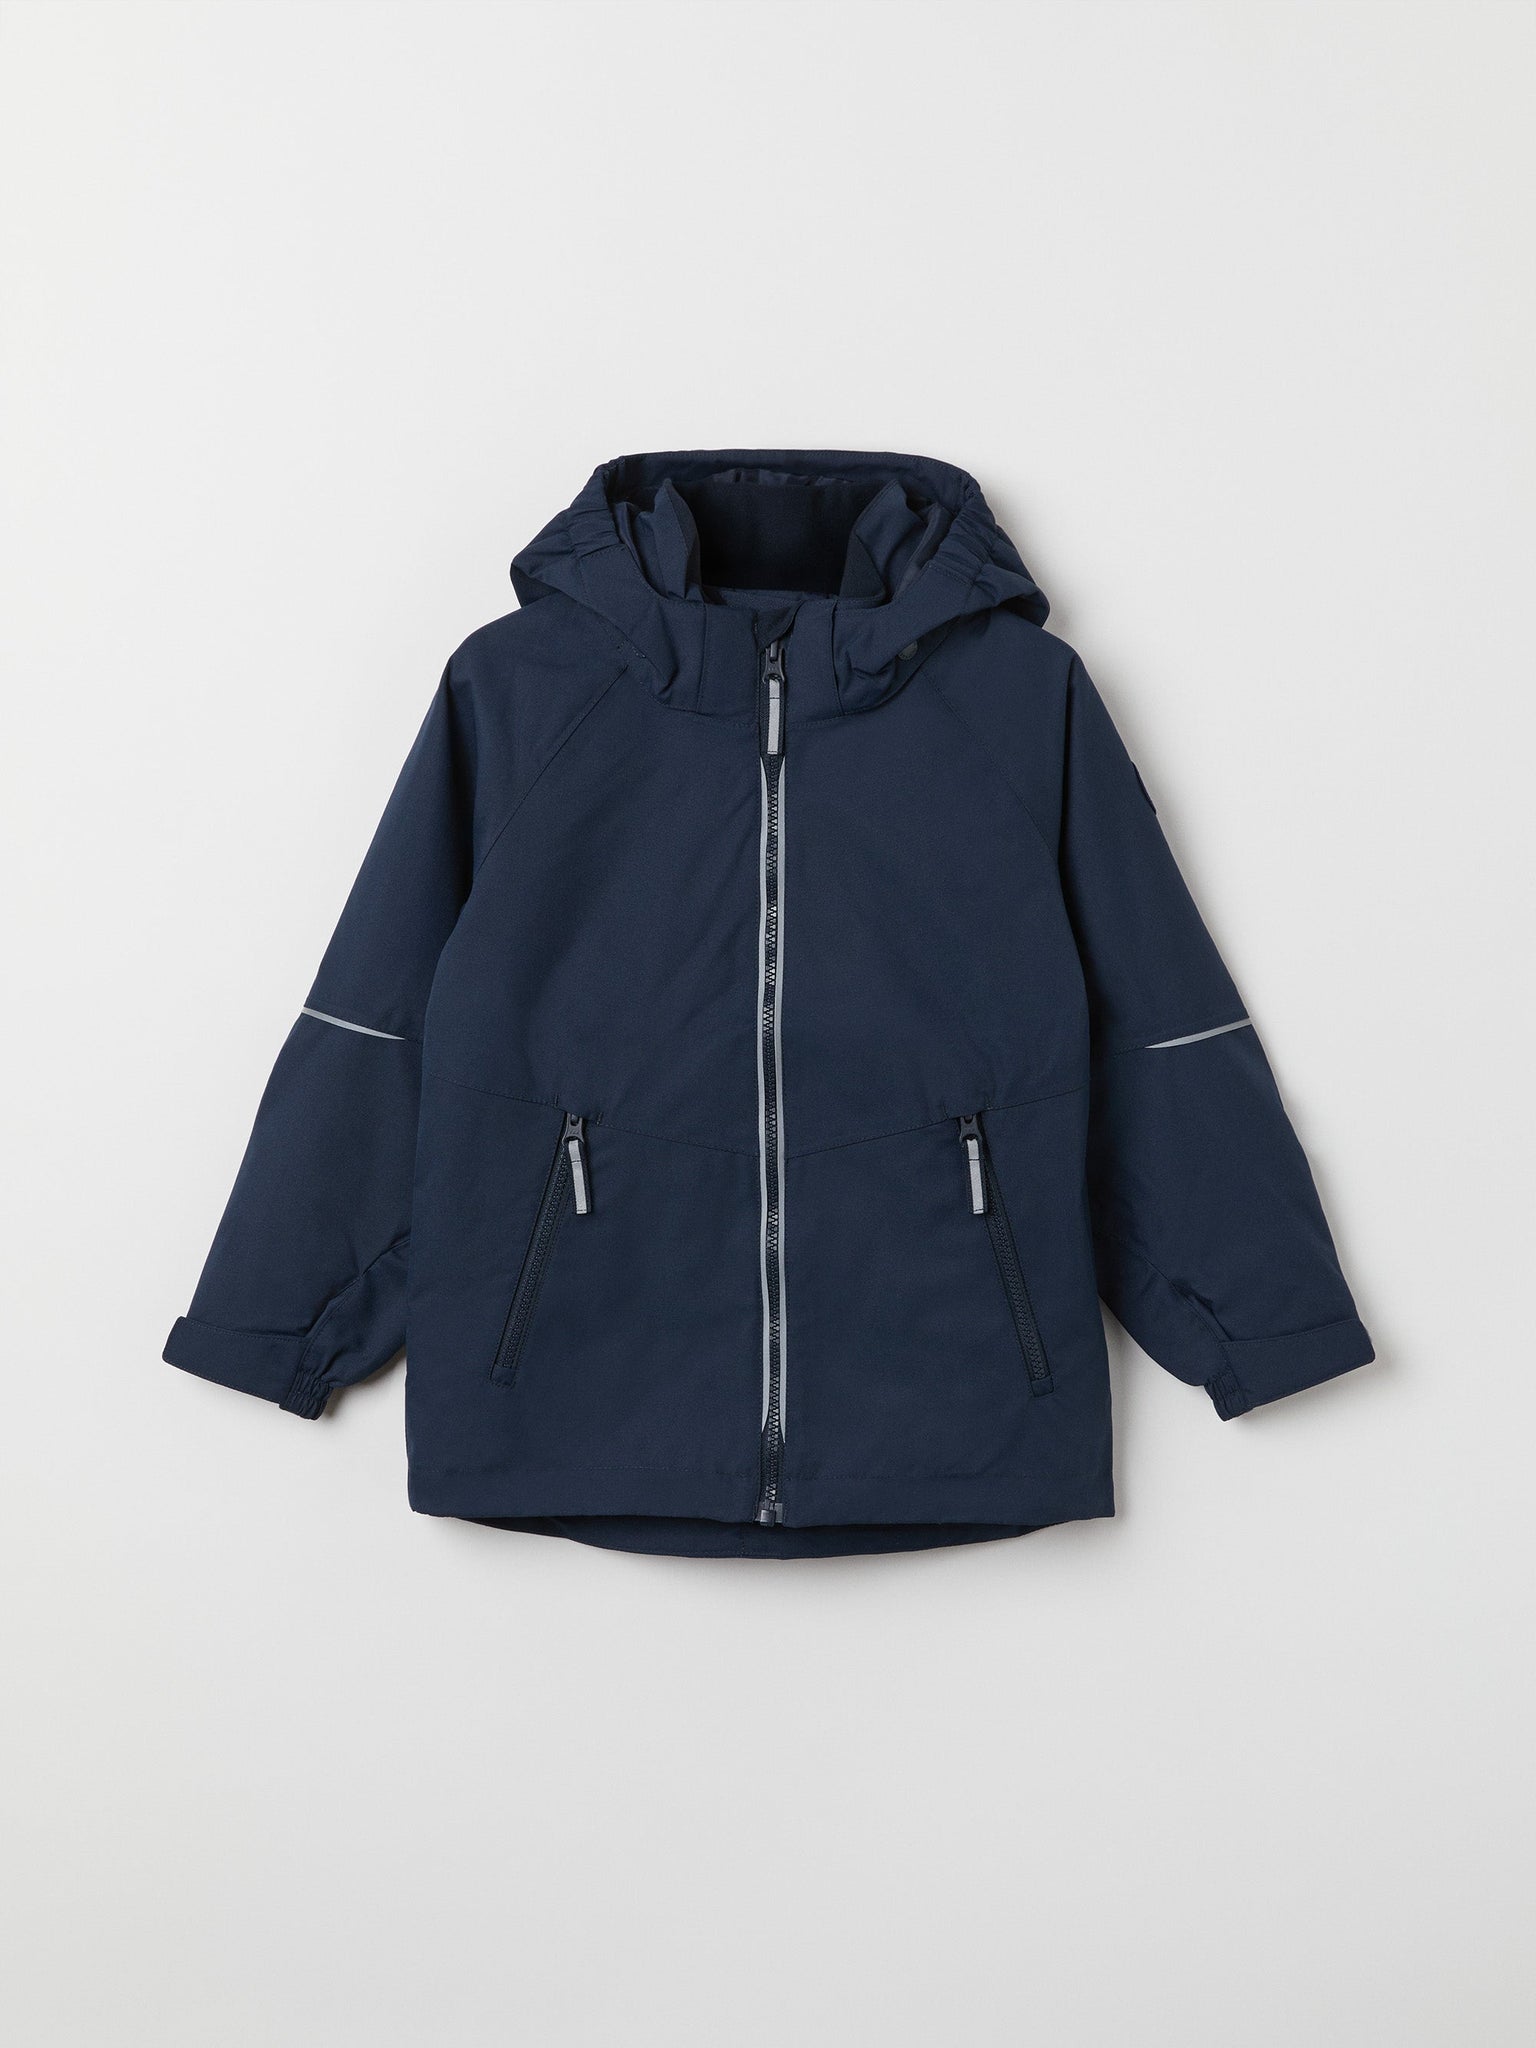 Kids Navy Shell Jacket from the Polarn O. Pyret outerwear collection. Ethically produced kids outerwear.